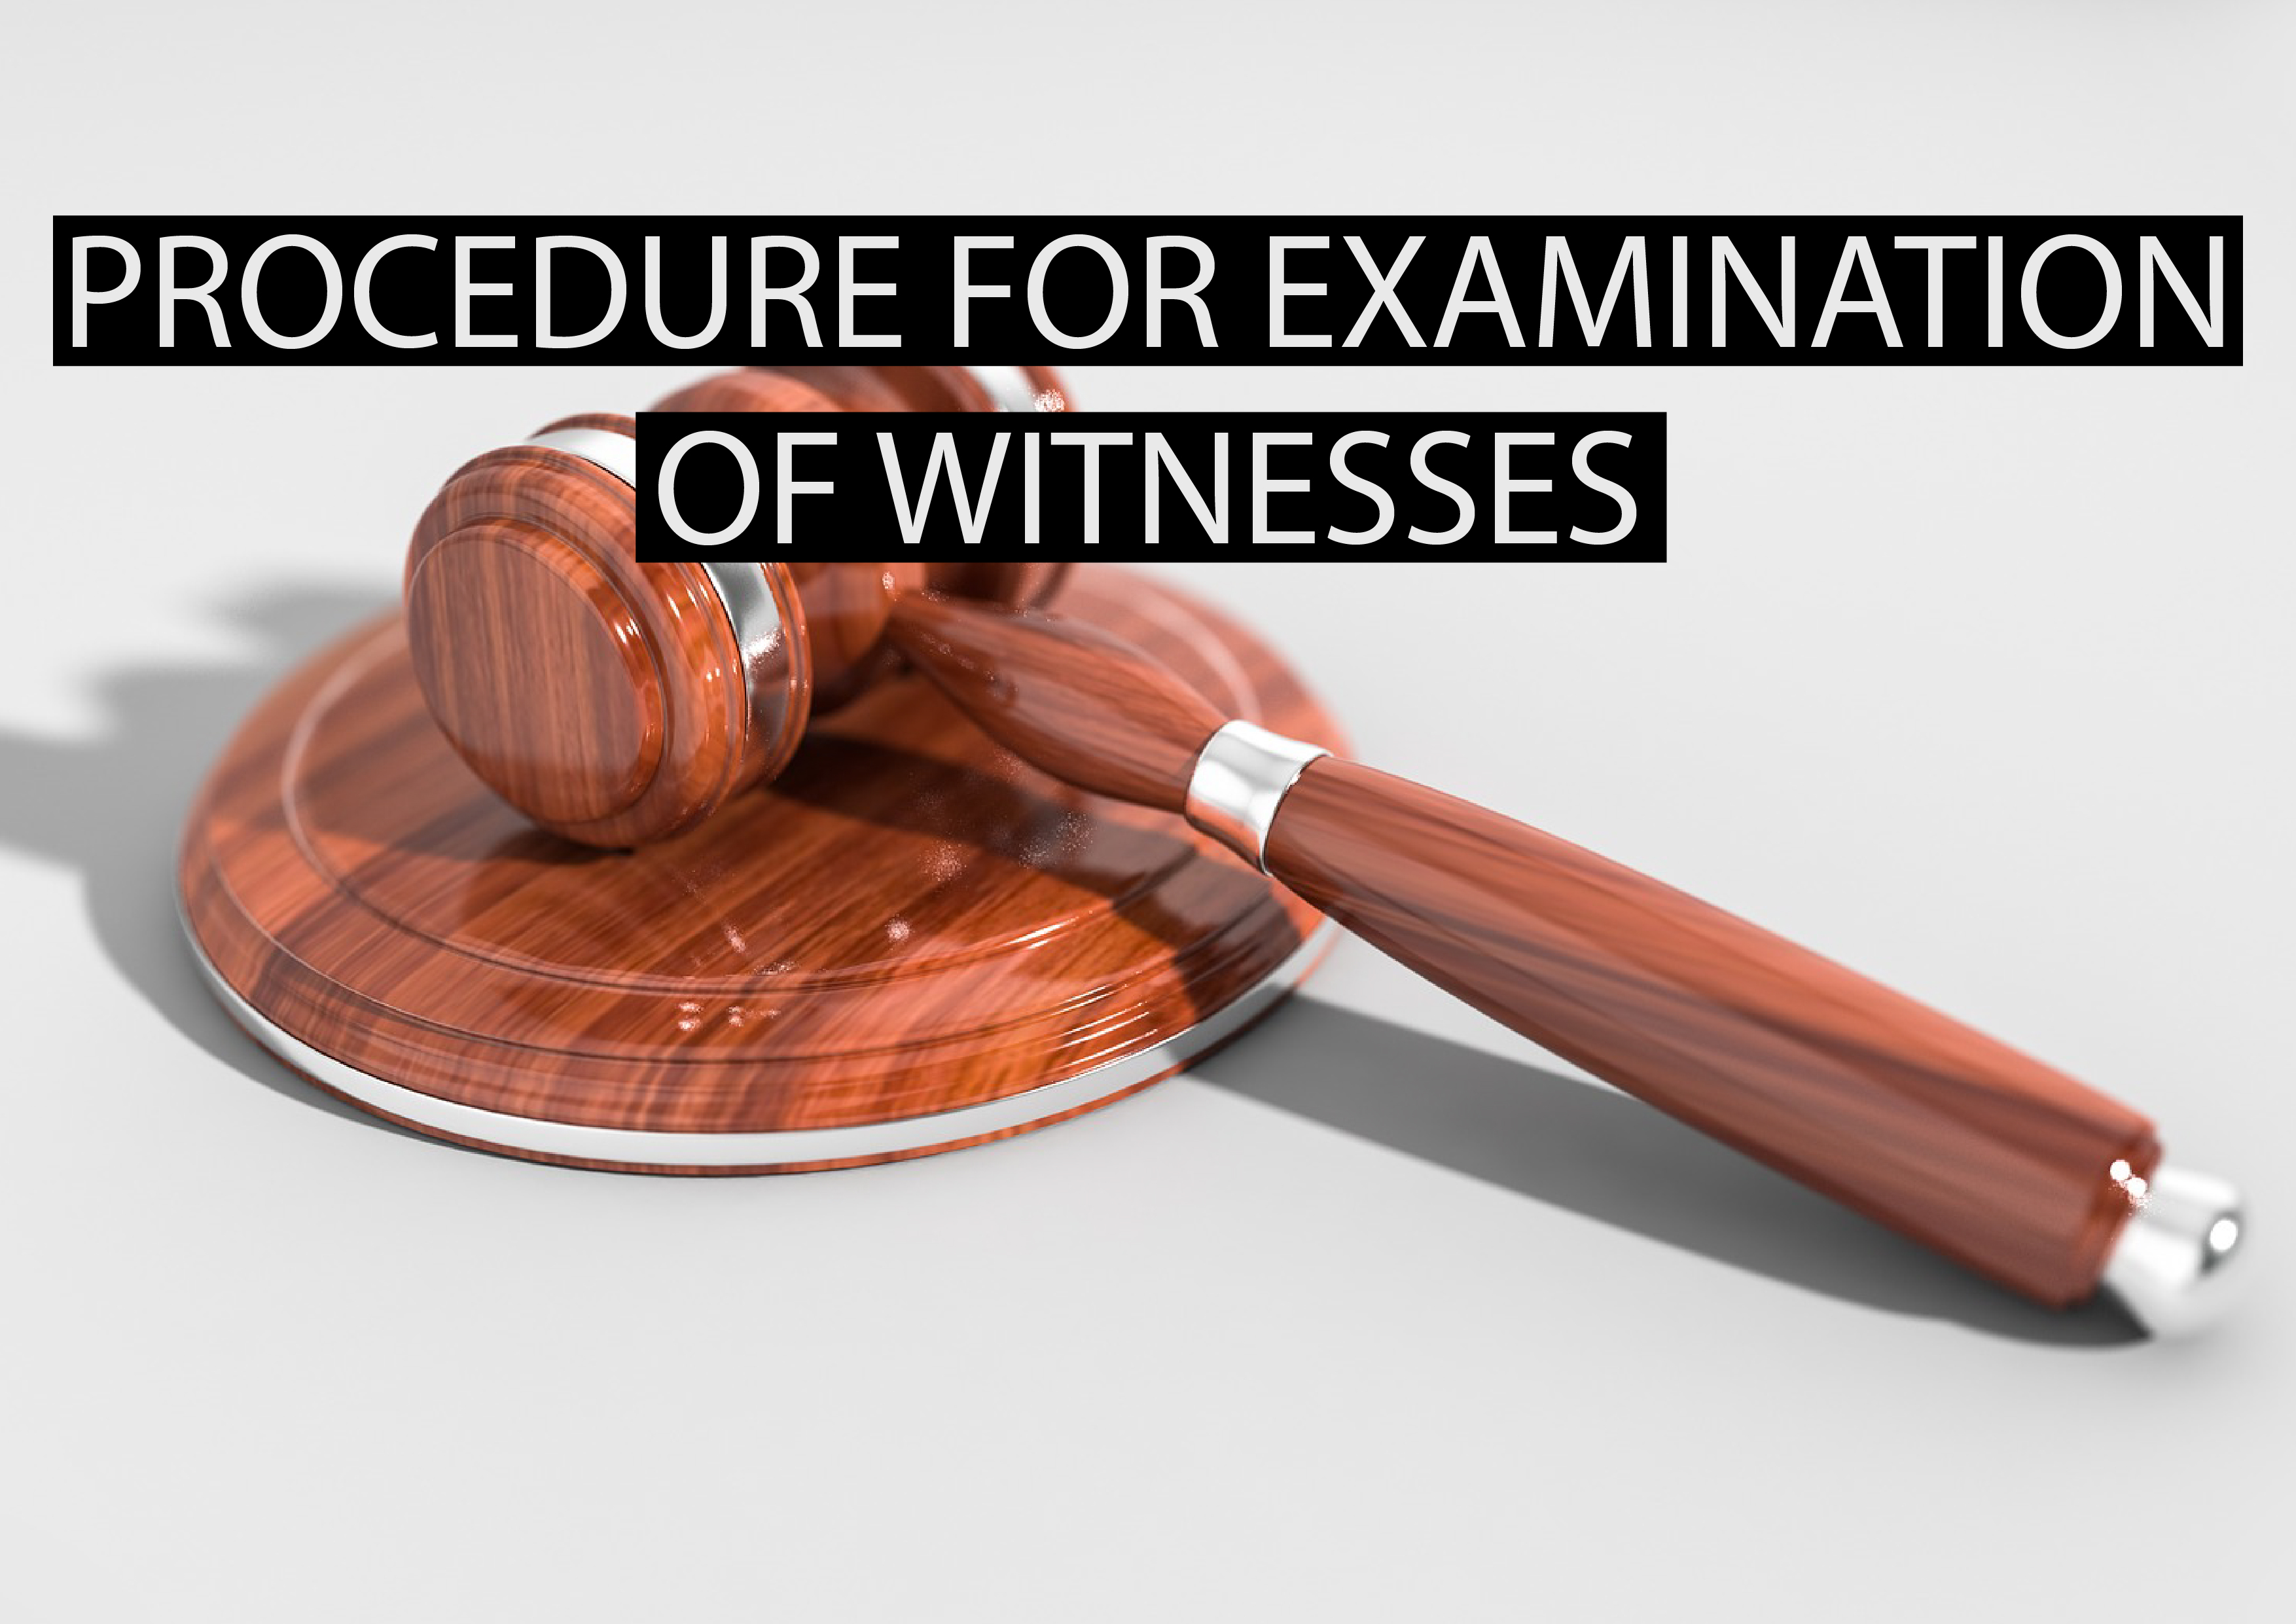 Procedure for Examination of Witnesses